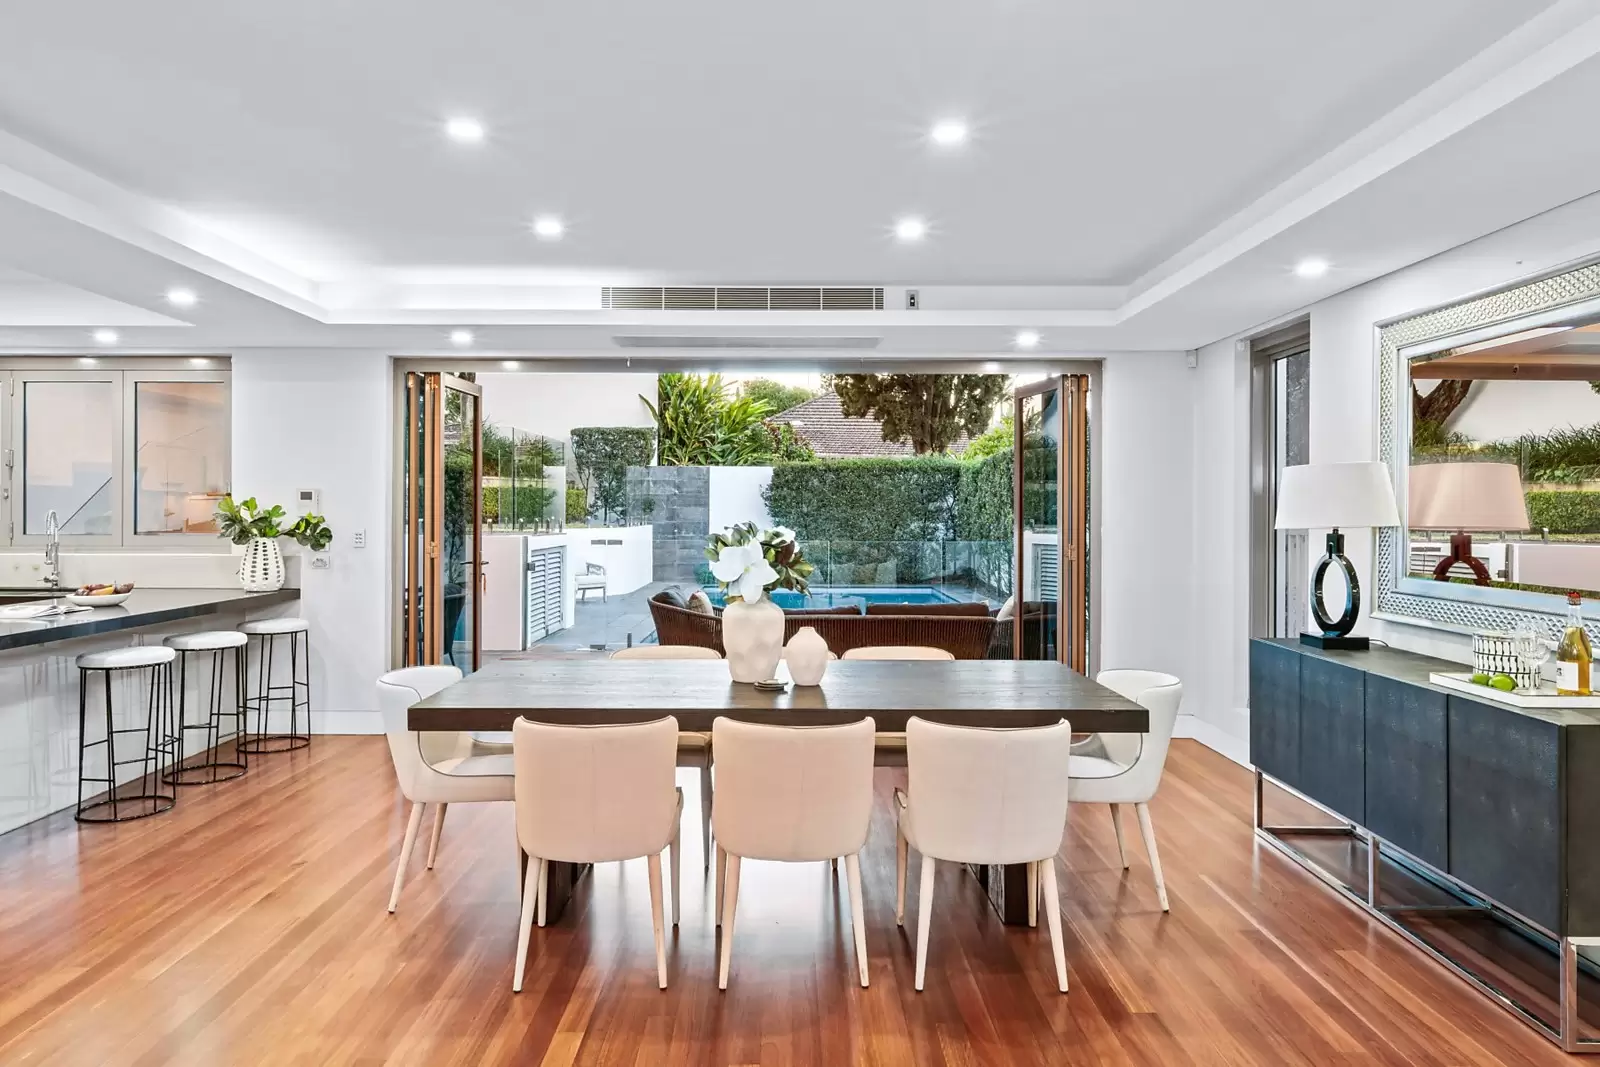 Photo #6: 5 Milton Avenue, Woollahra - Sold by Sydney Sotheby's International Realty